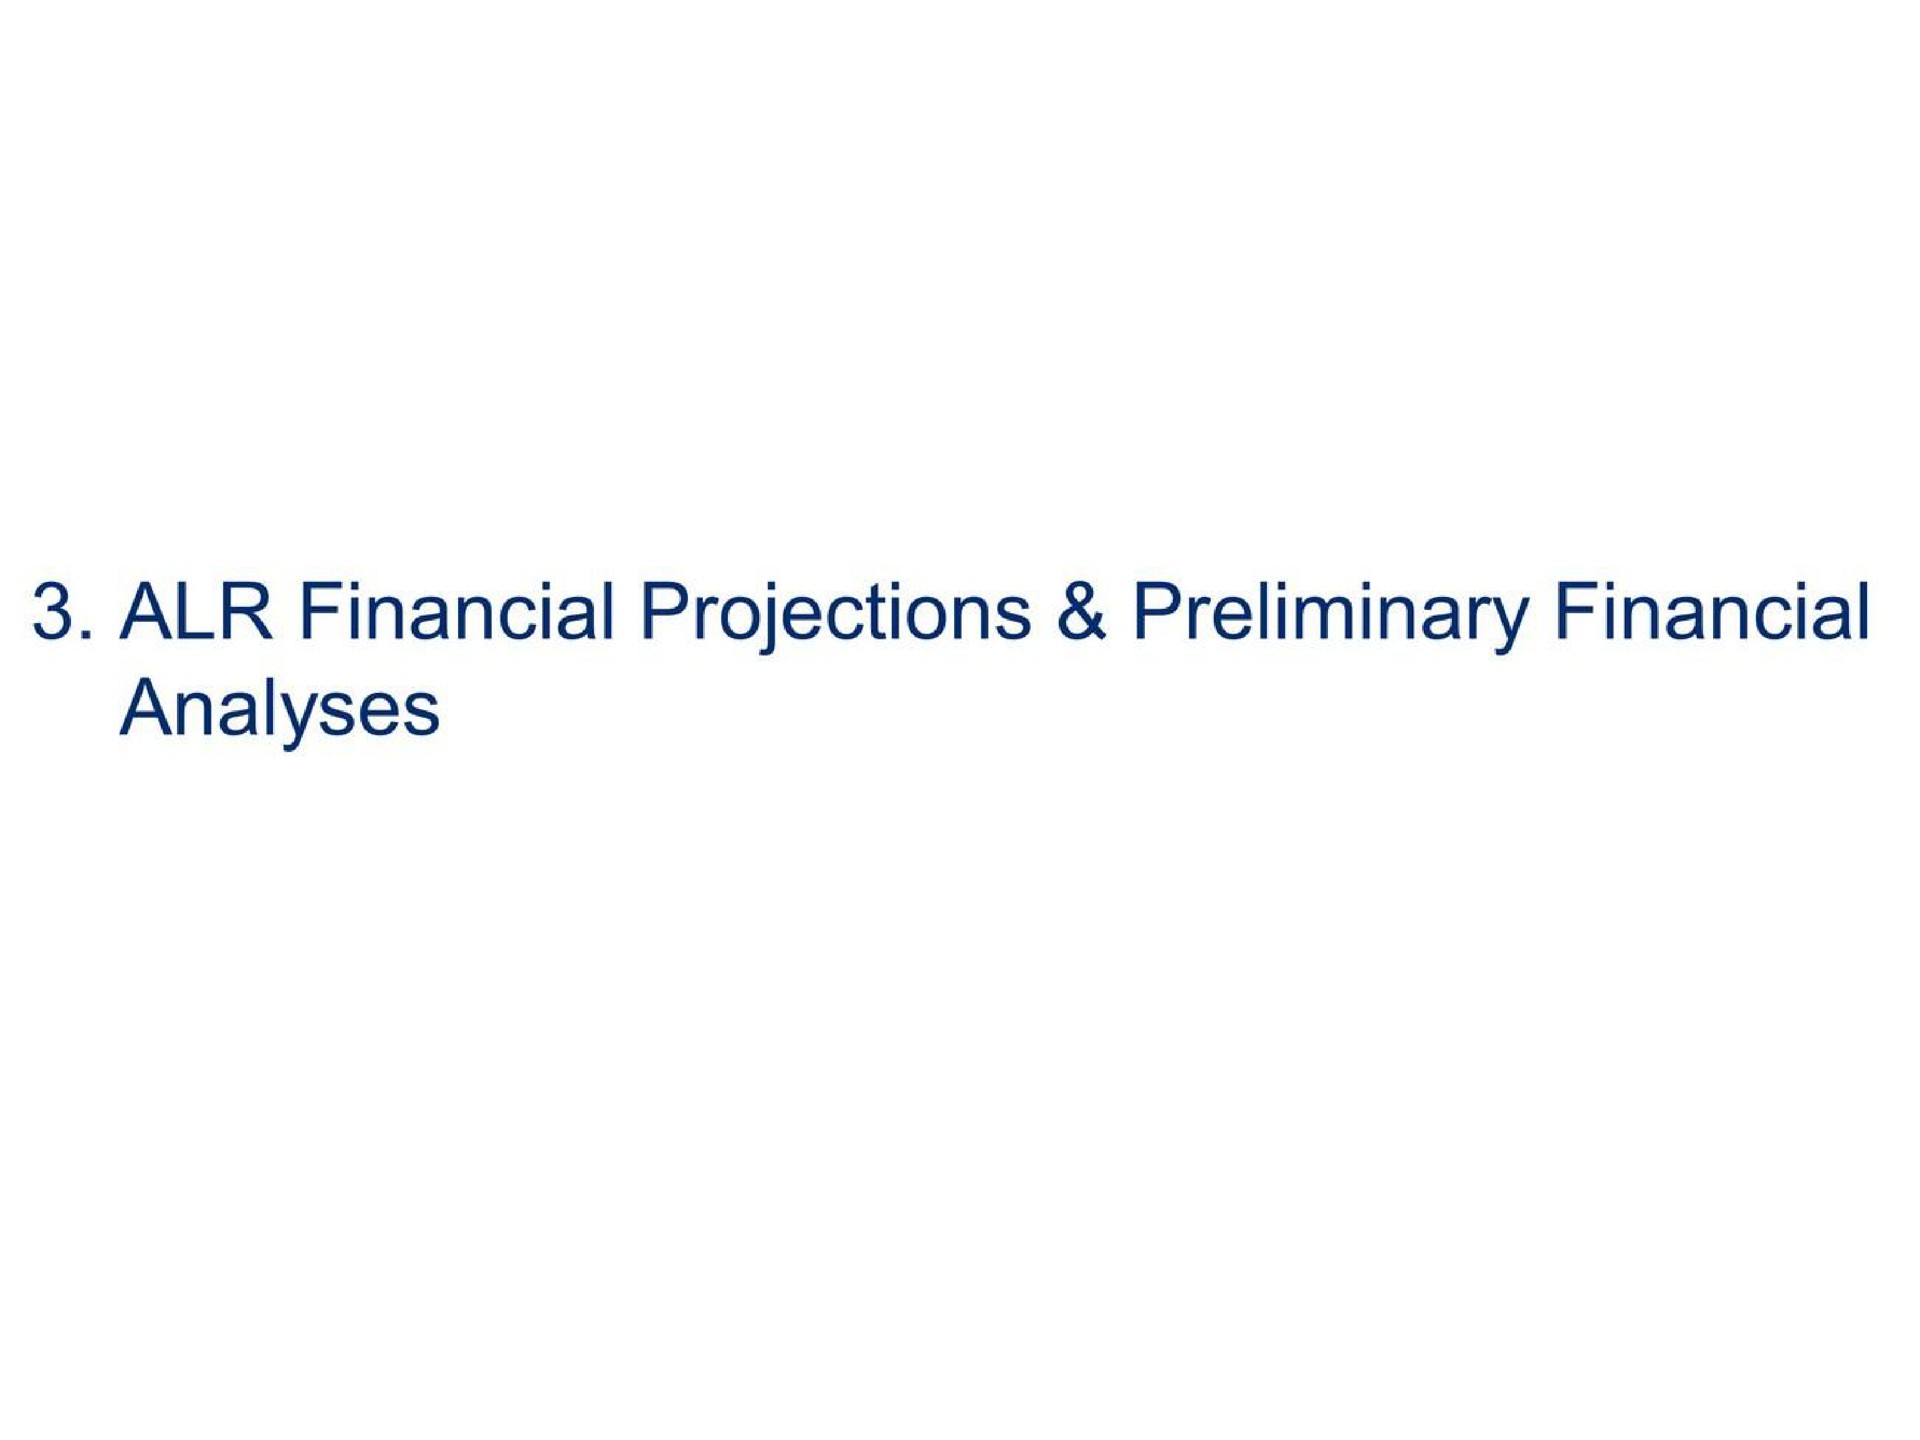 financial projections preliminary financial analyses | Citi